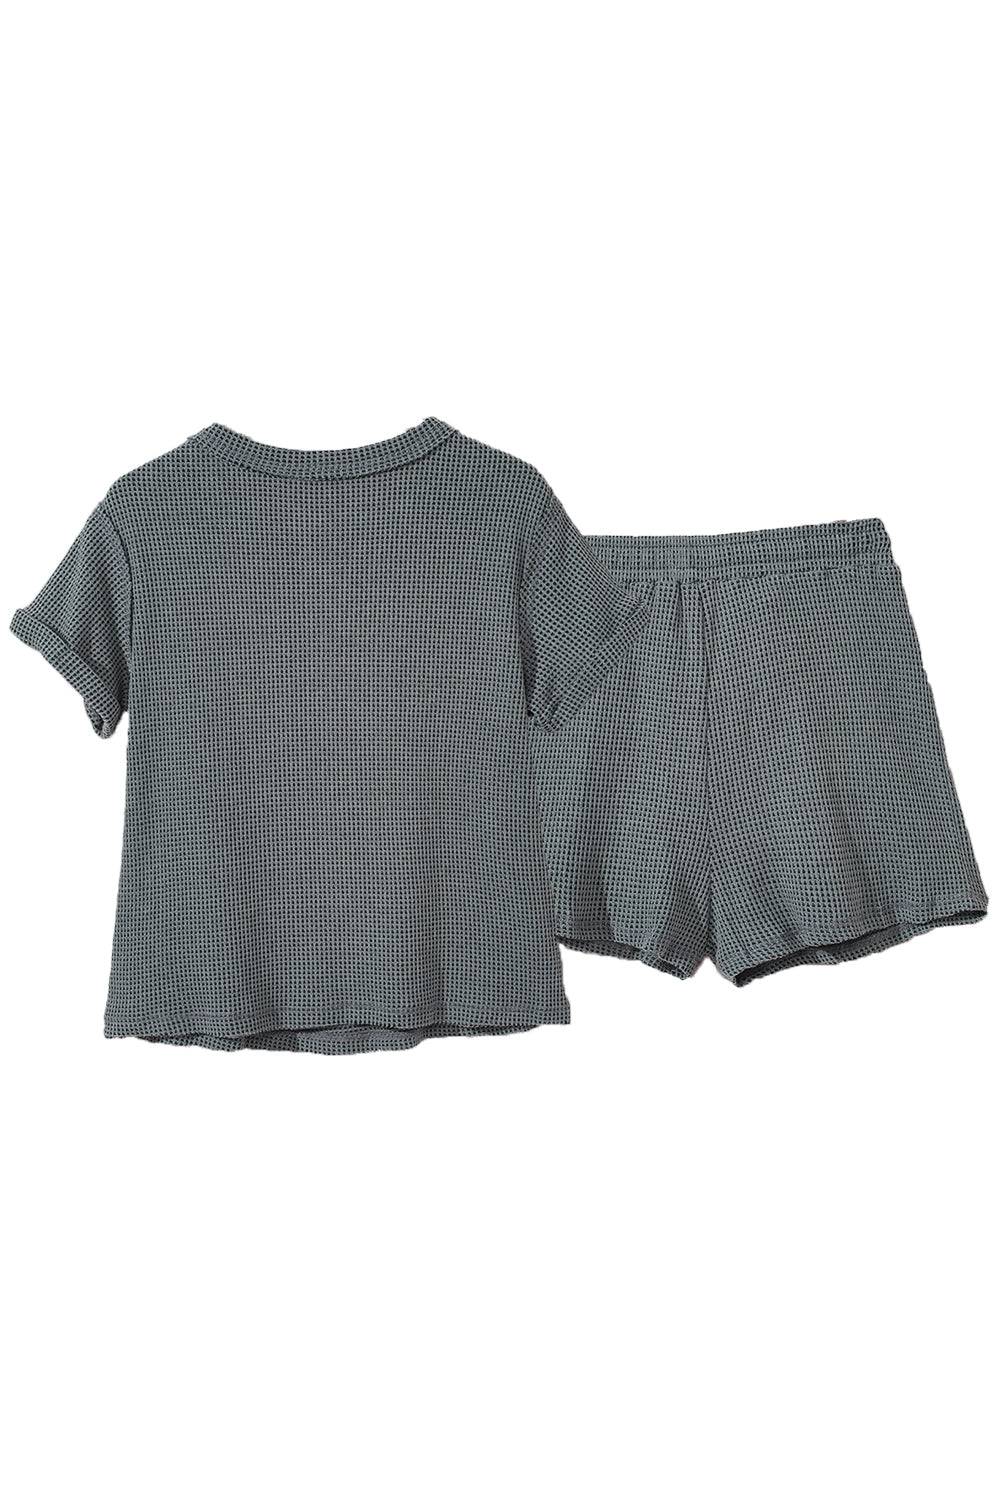 a baby girl's outfit with short sleeves and shorts